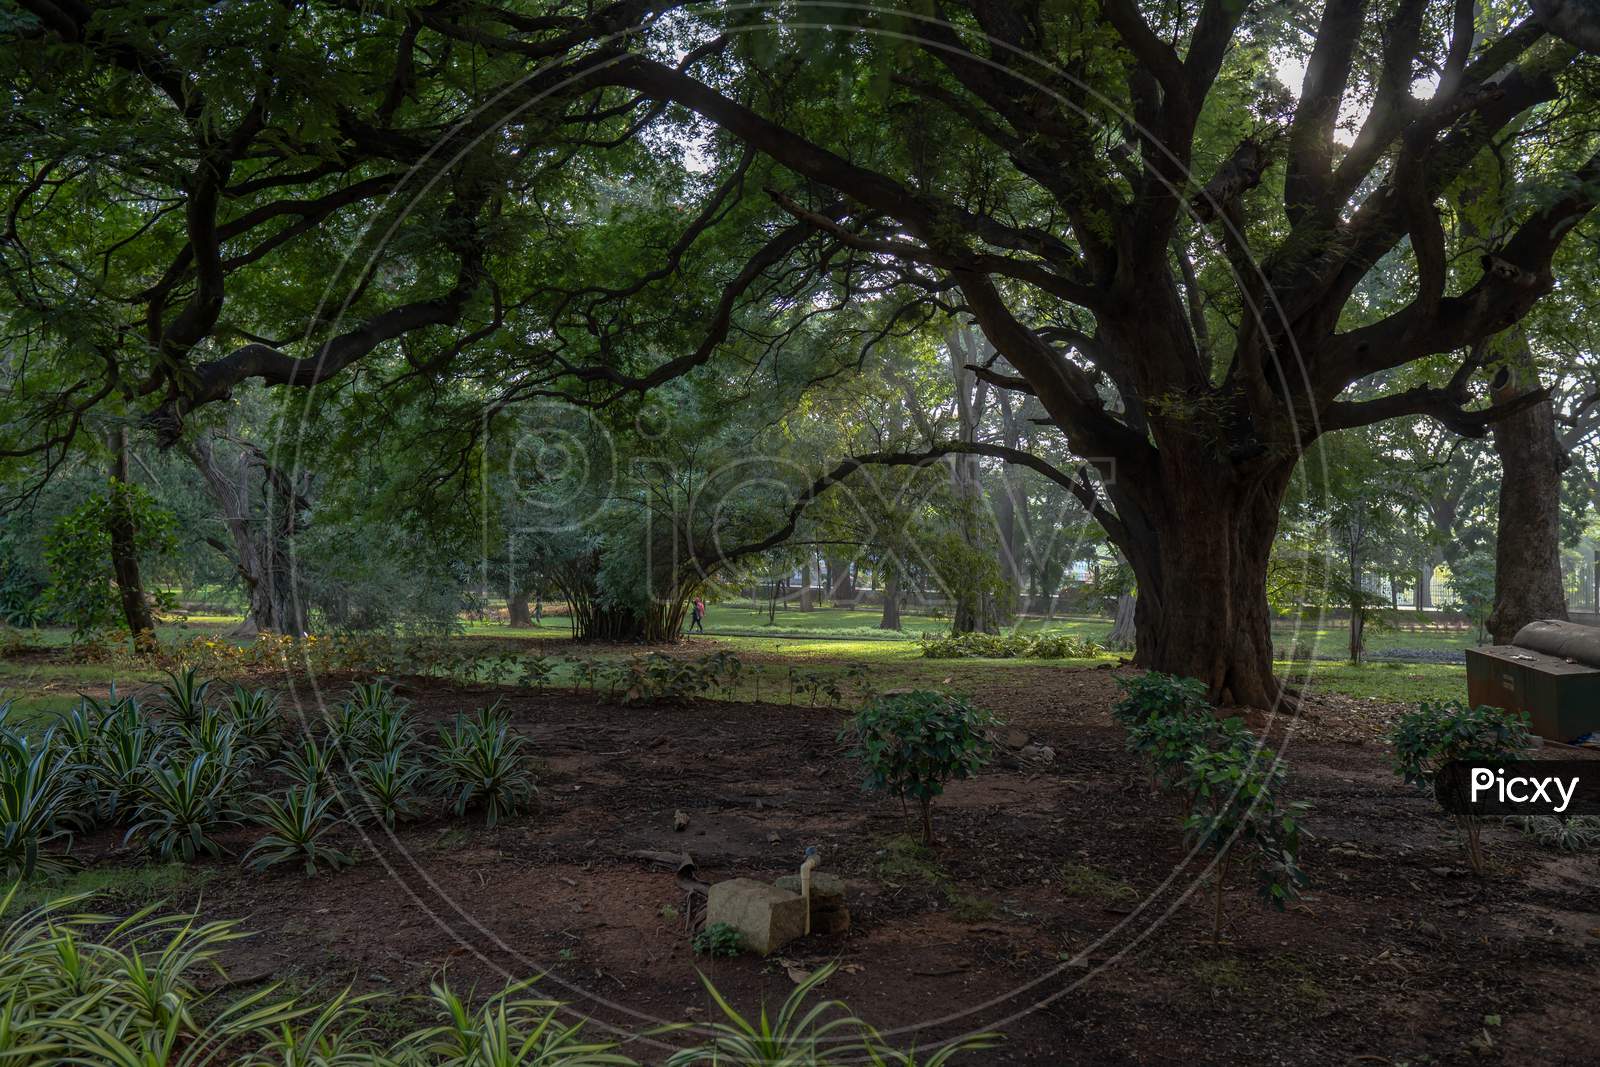 Water Pipe In A Big Tree In Cubbon Park At Morning